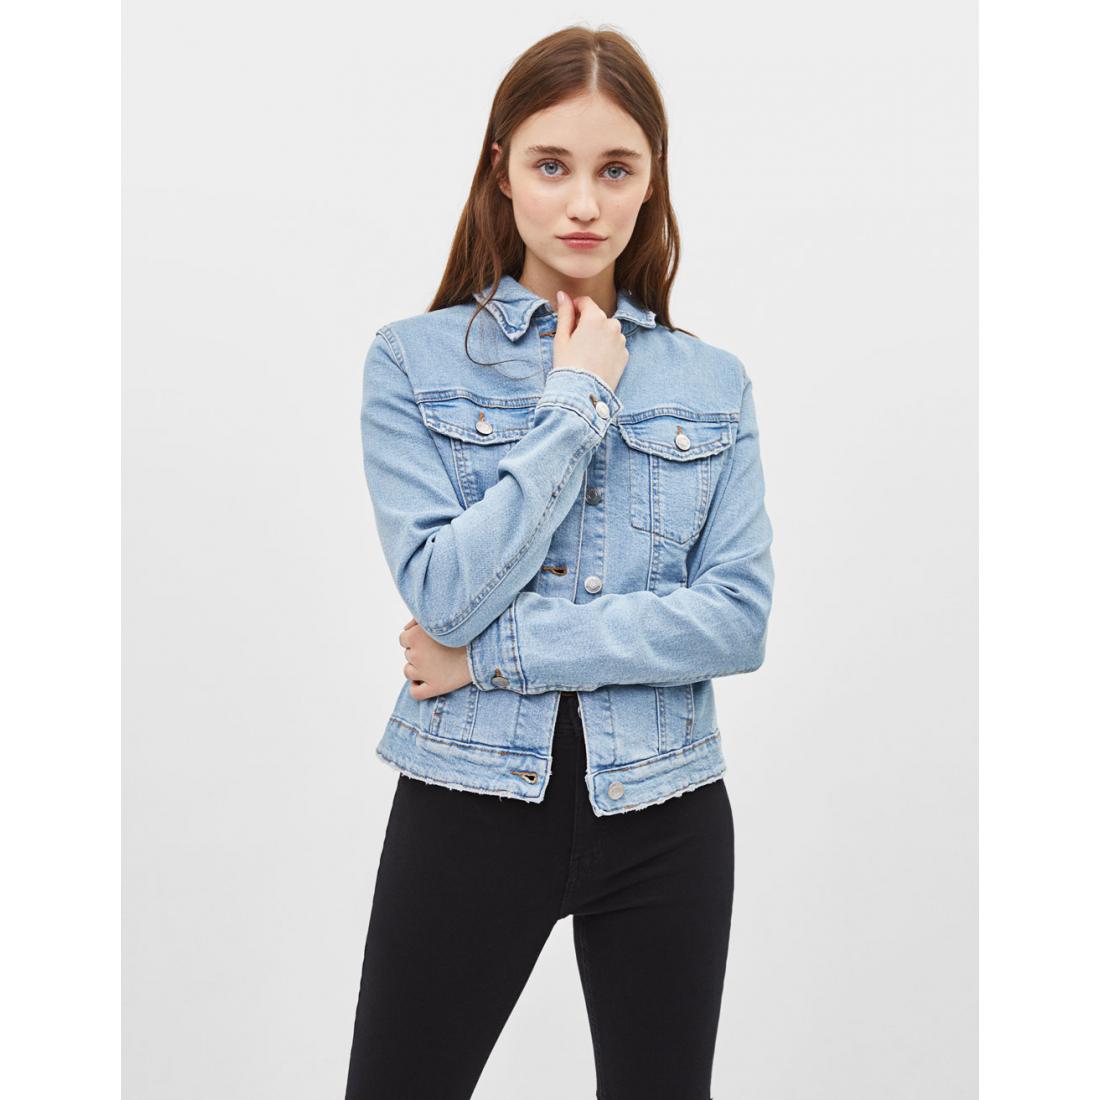 Collared denim jacket with long sleeves and buttoned cuffs. Featuring two chest flap pockets and metal button-up fastening in the front.